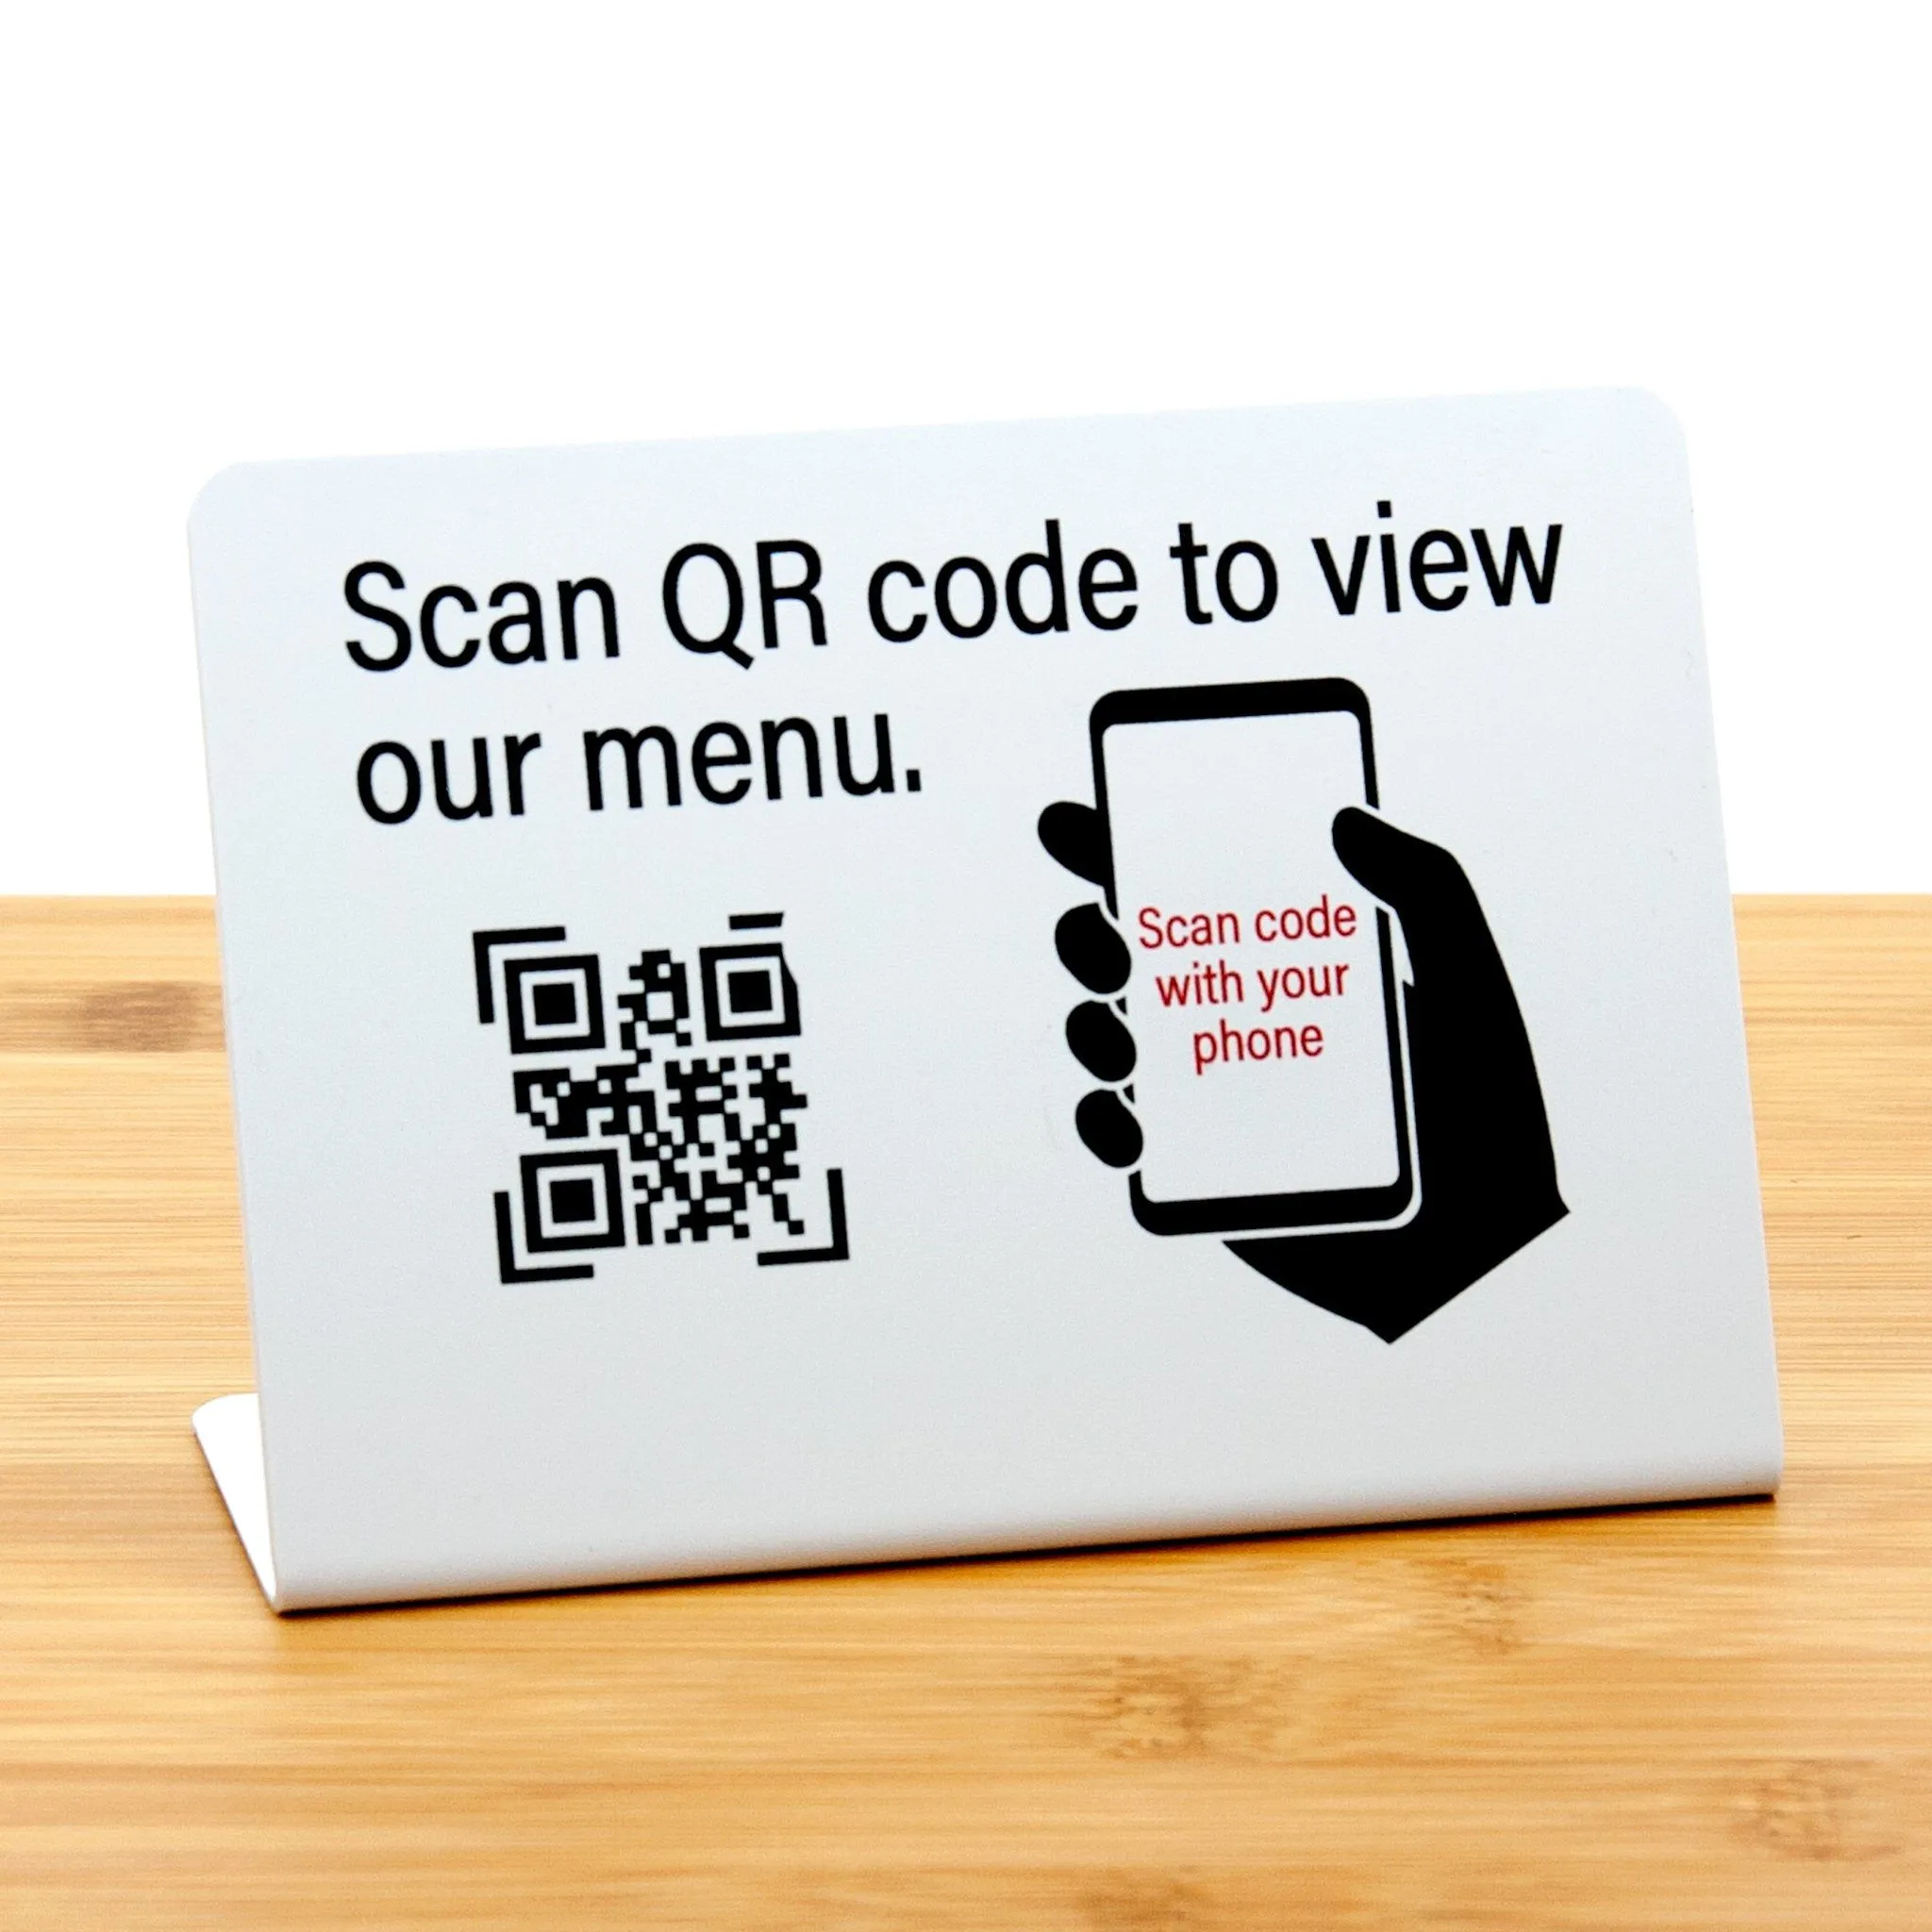 How are QR Codes Used for Social Distancing